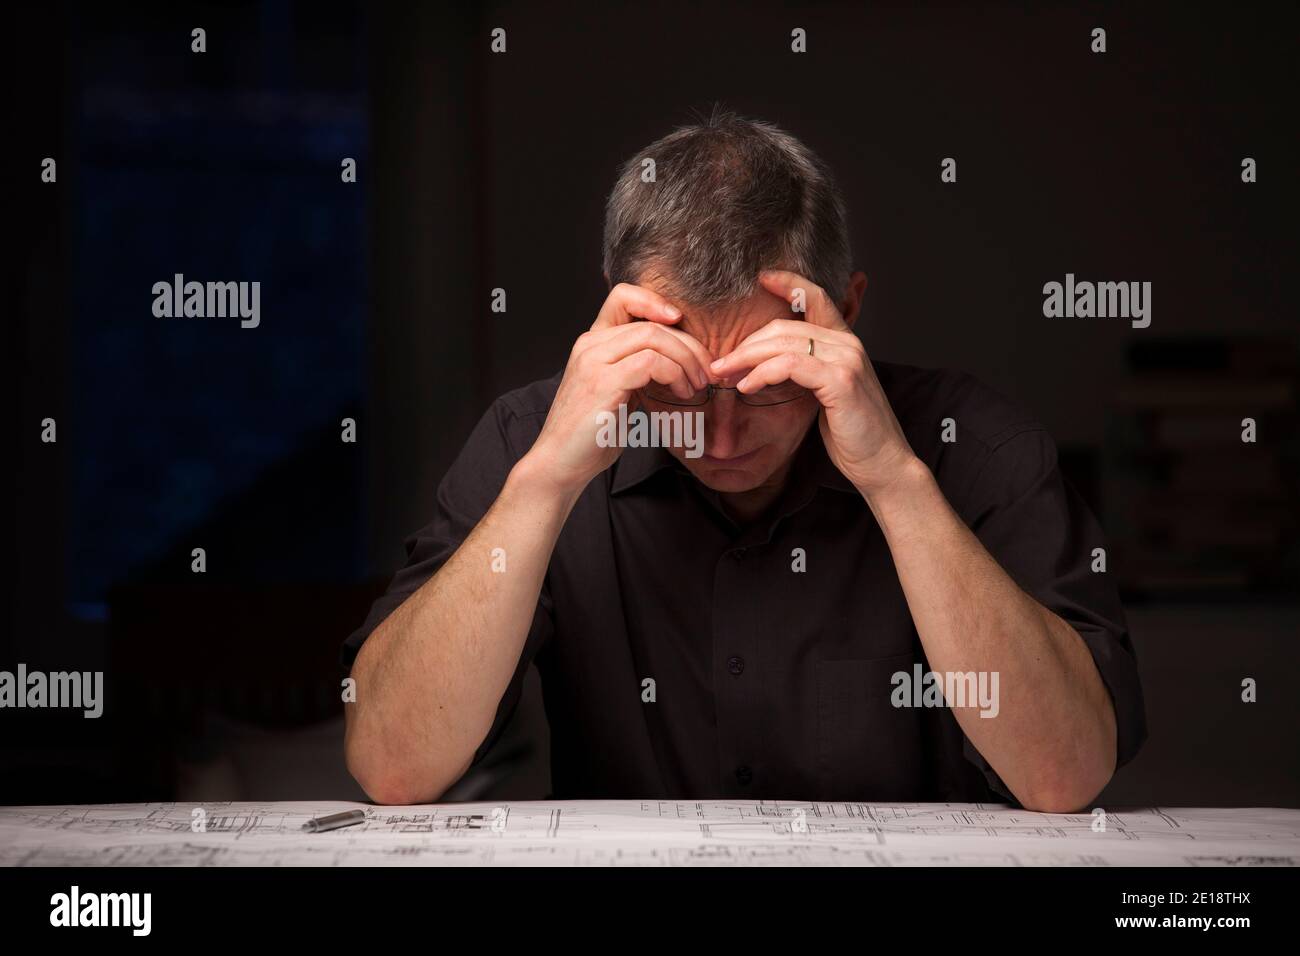 Tired and overworked architect or engineer sitting at home at a desk with blueprint - dark image Stock Photo